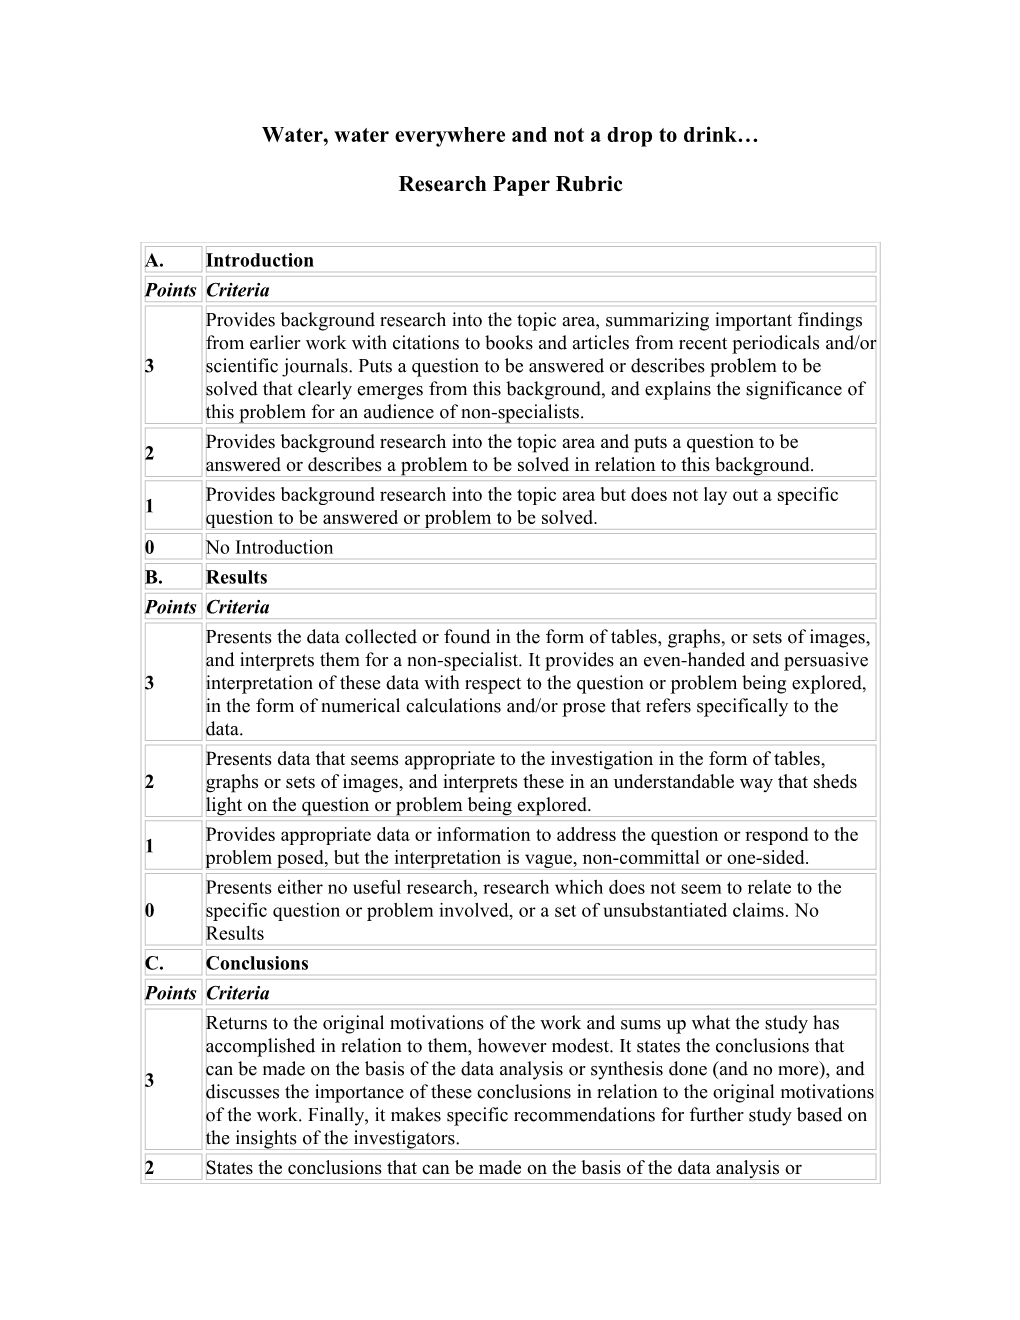 Sample Rubric for Written Research Report Or Article